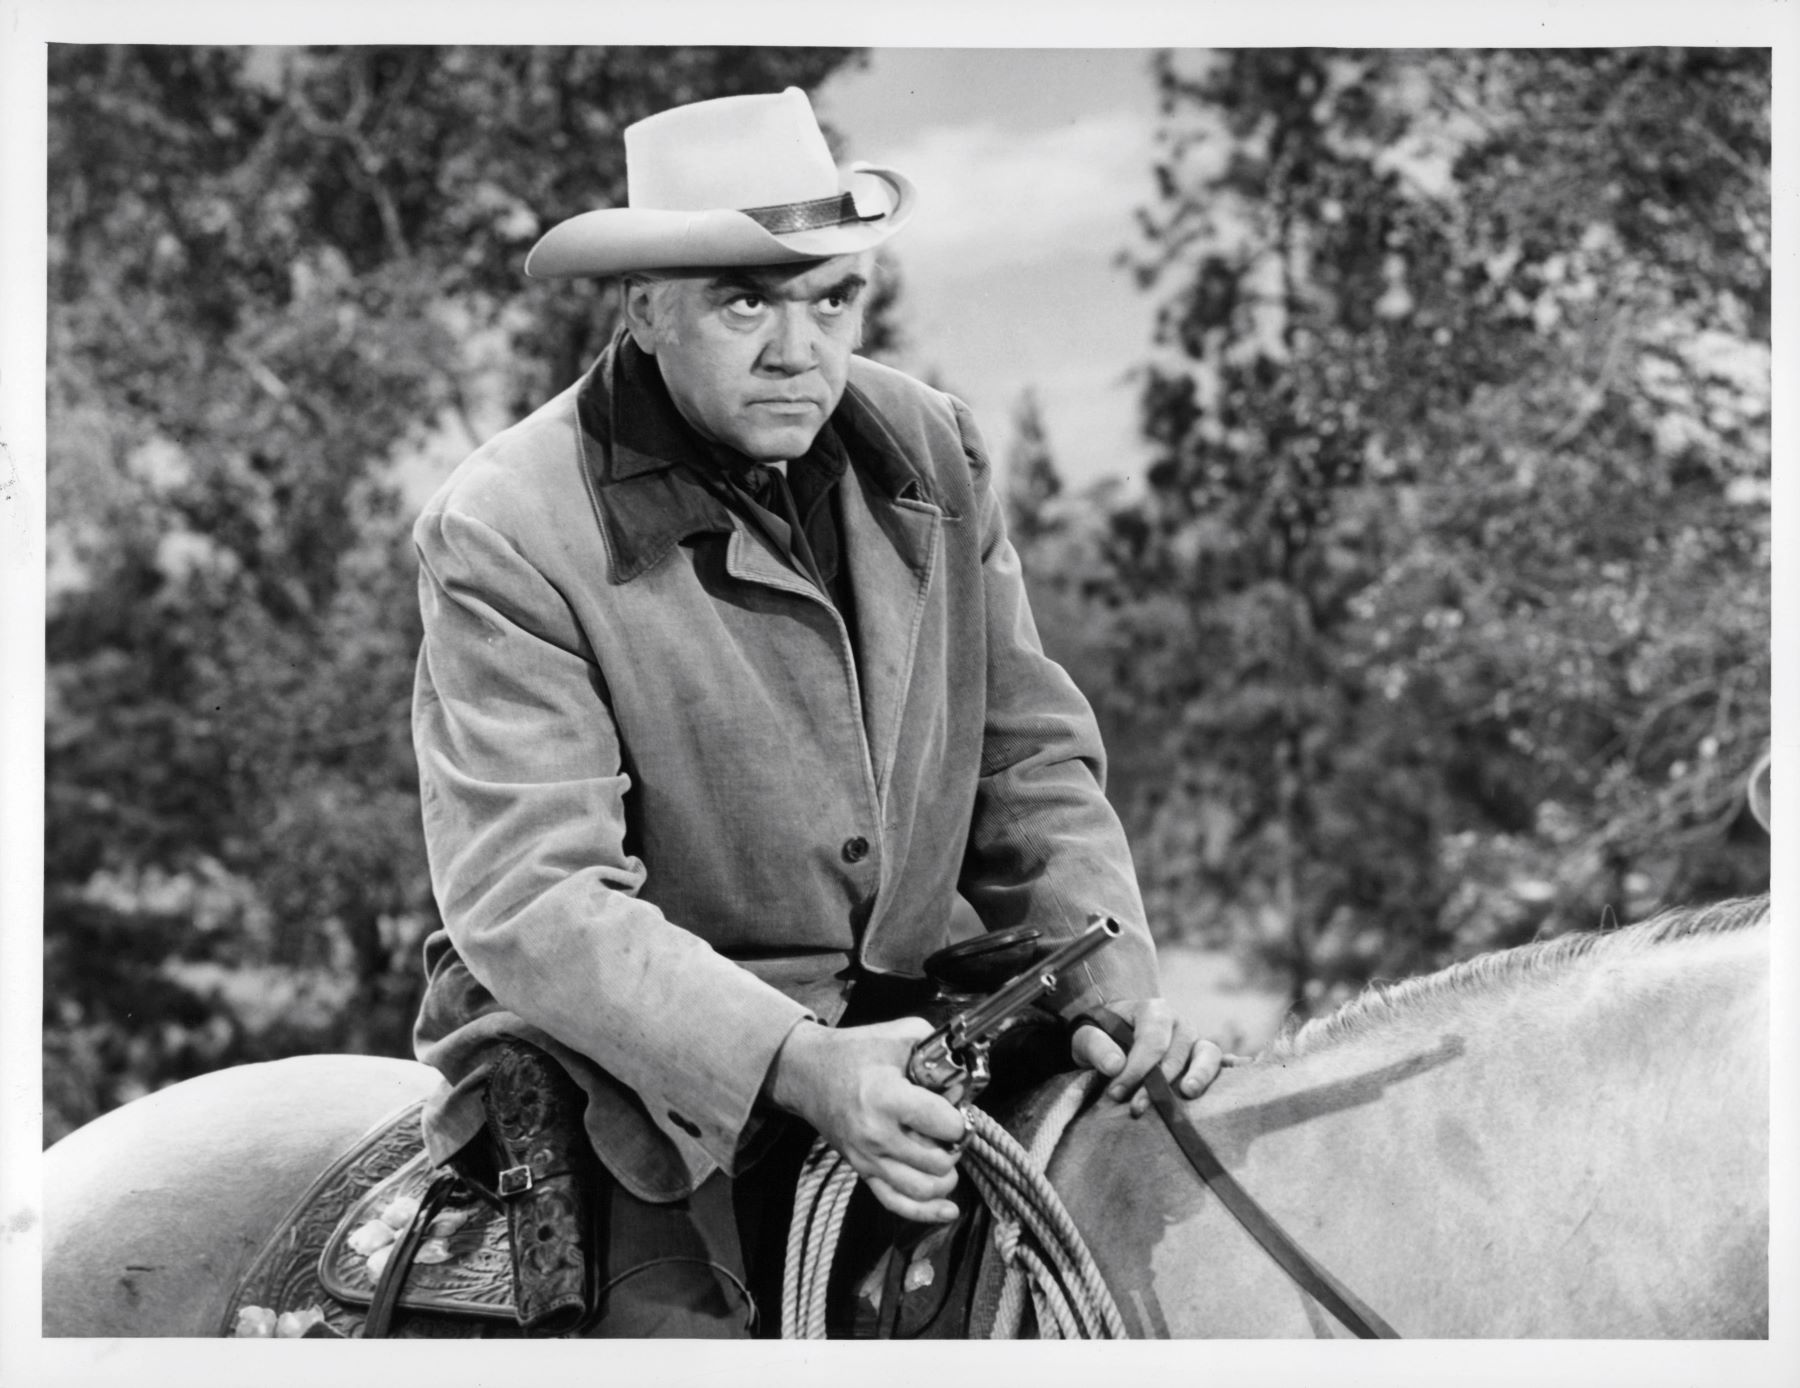 Actor Lorne Greene riding a horse on the set of 'Bonanza'